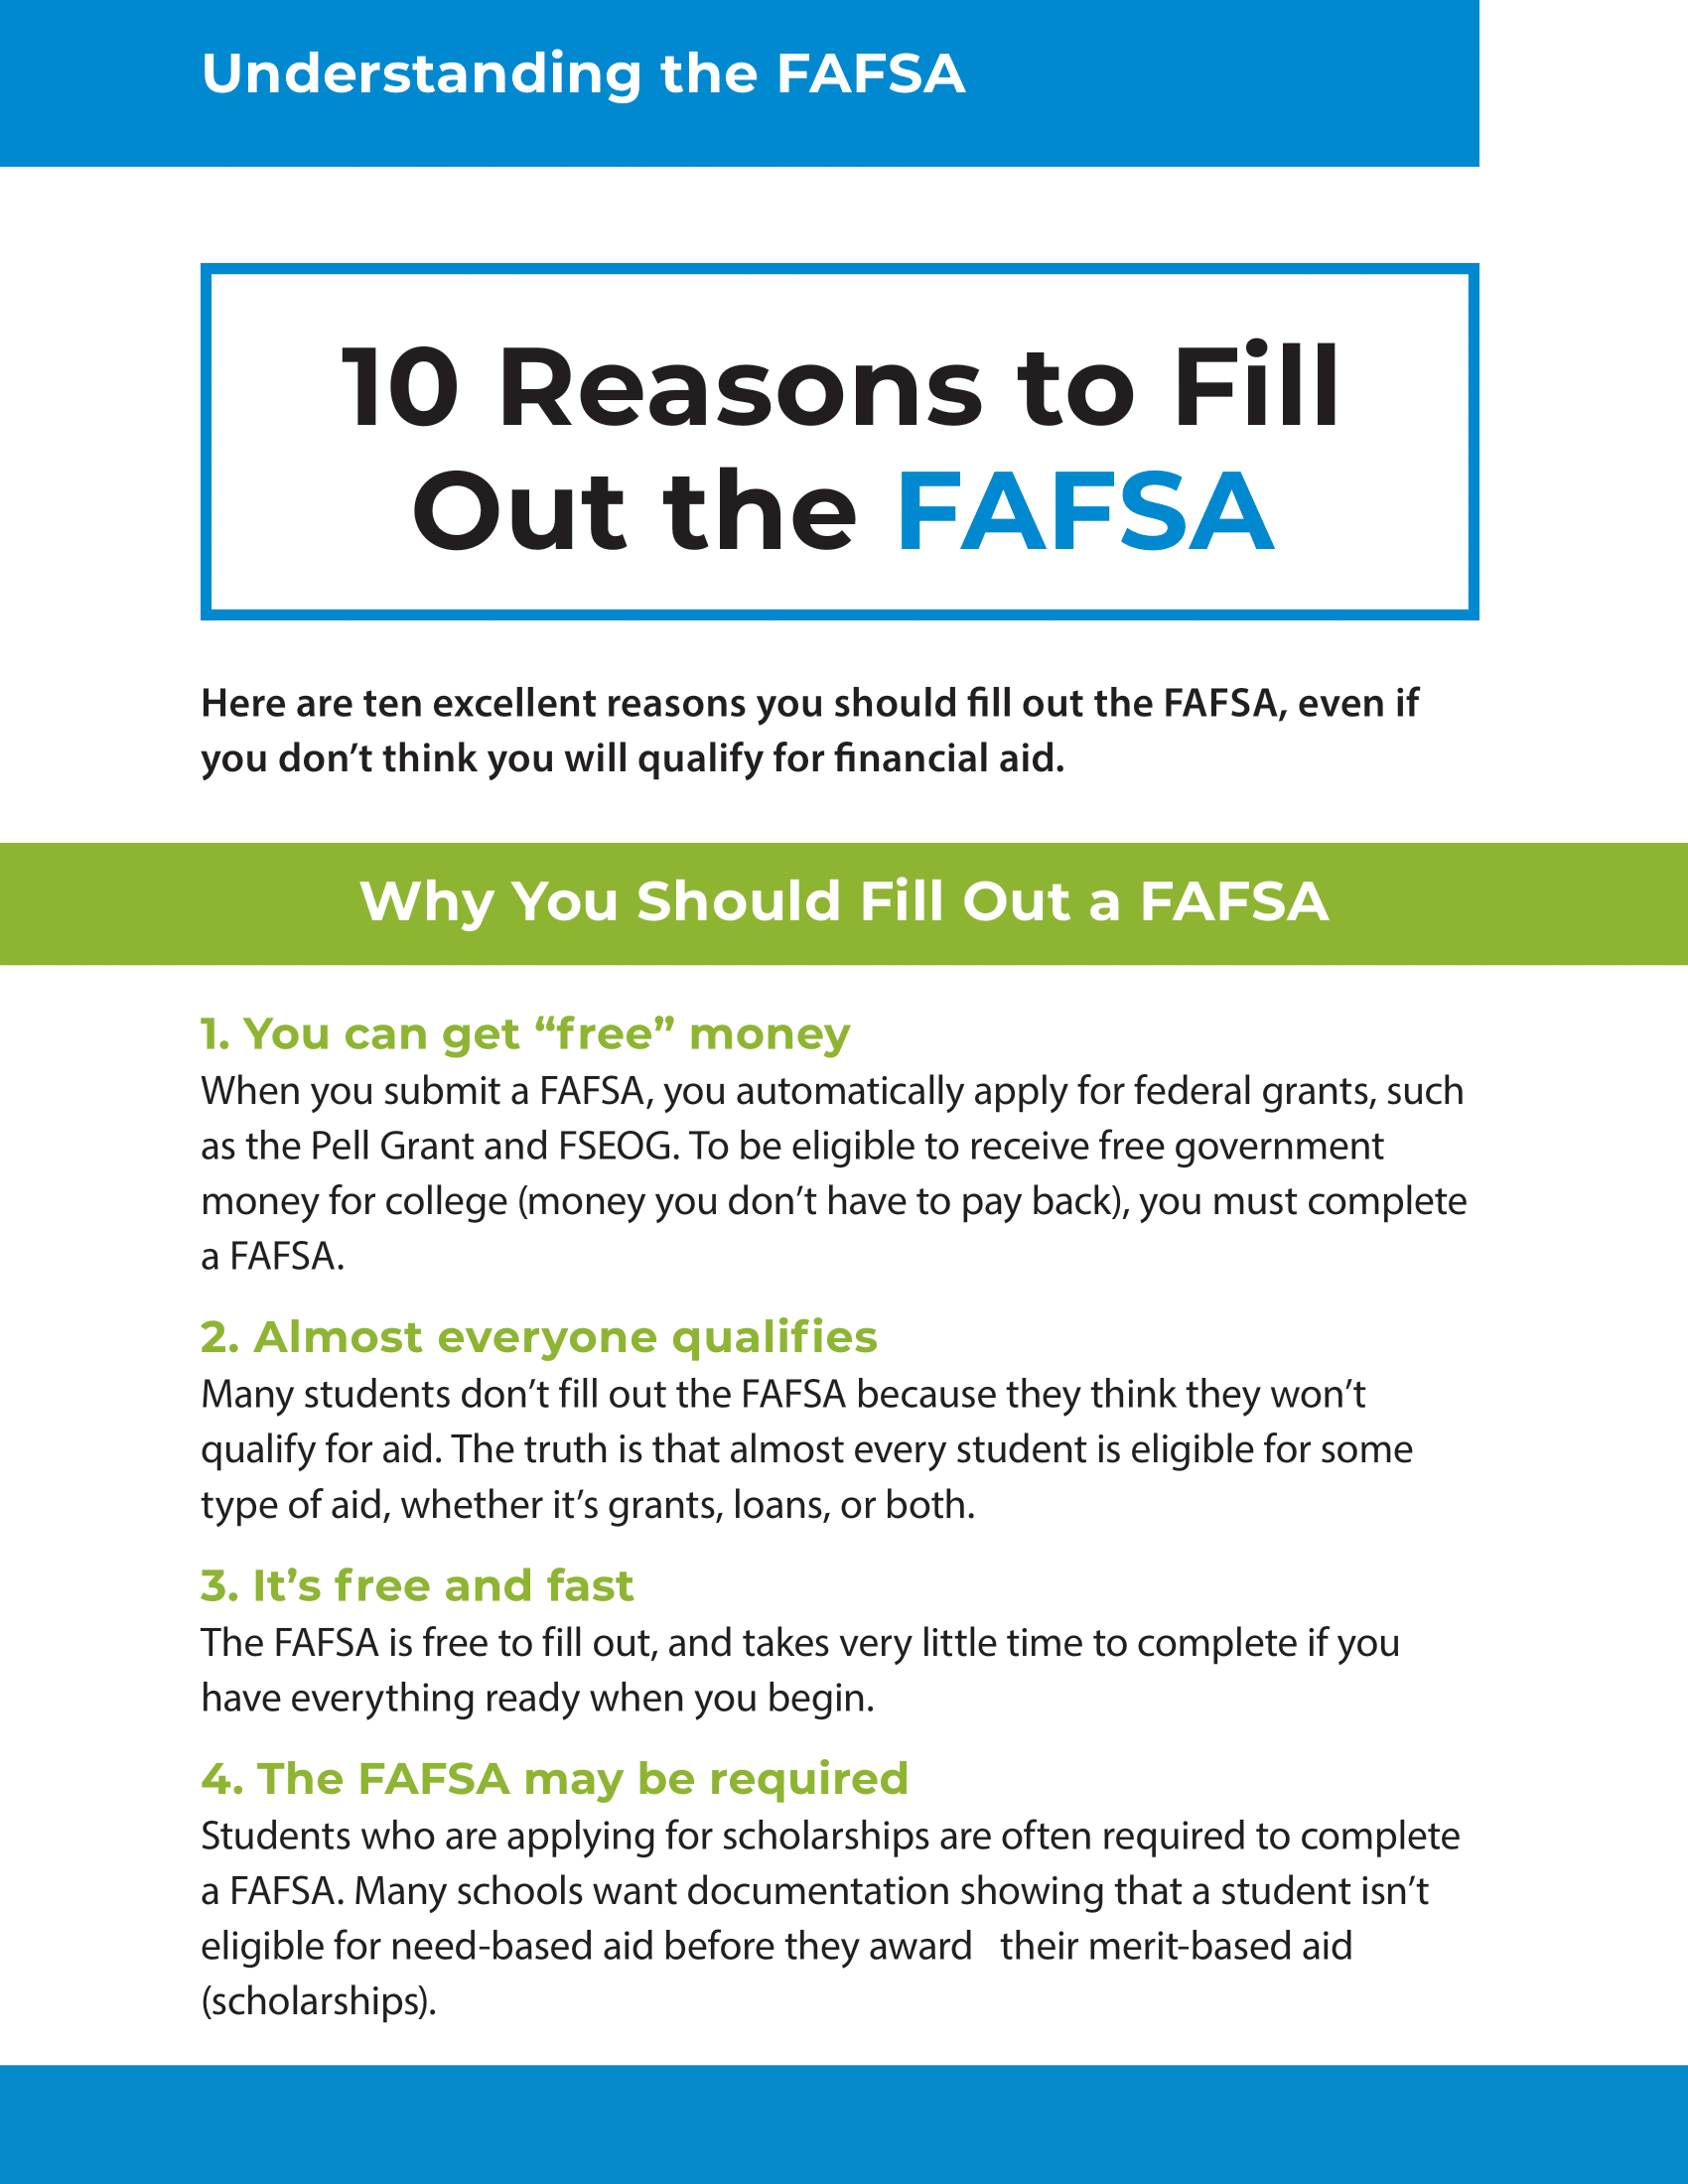 10 Reasons to Fill Out the FAFSA